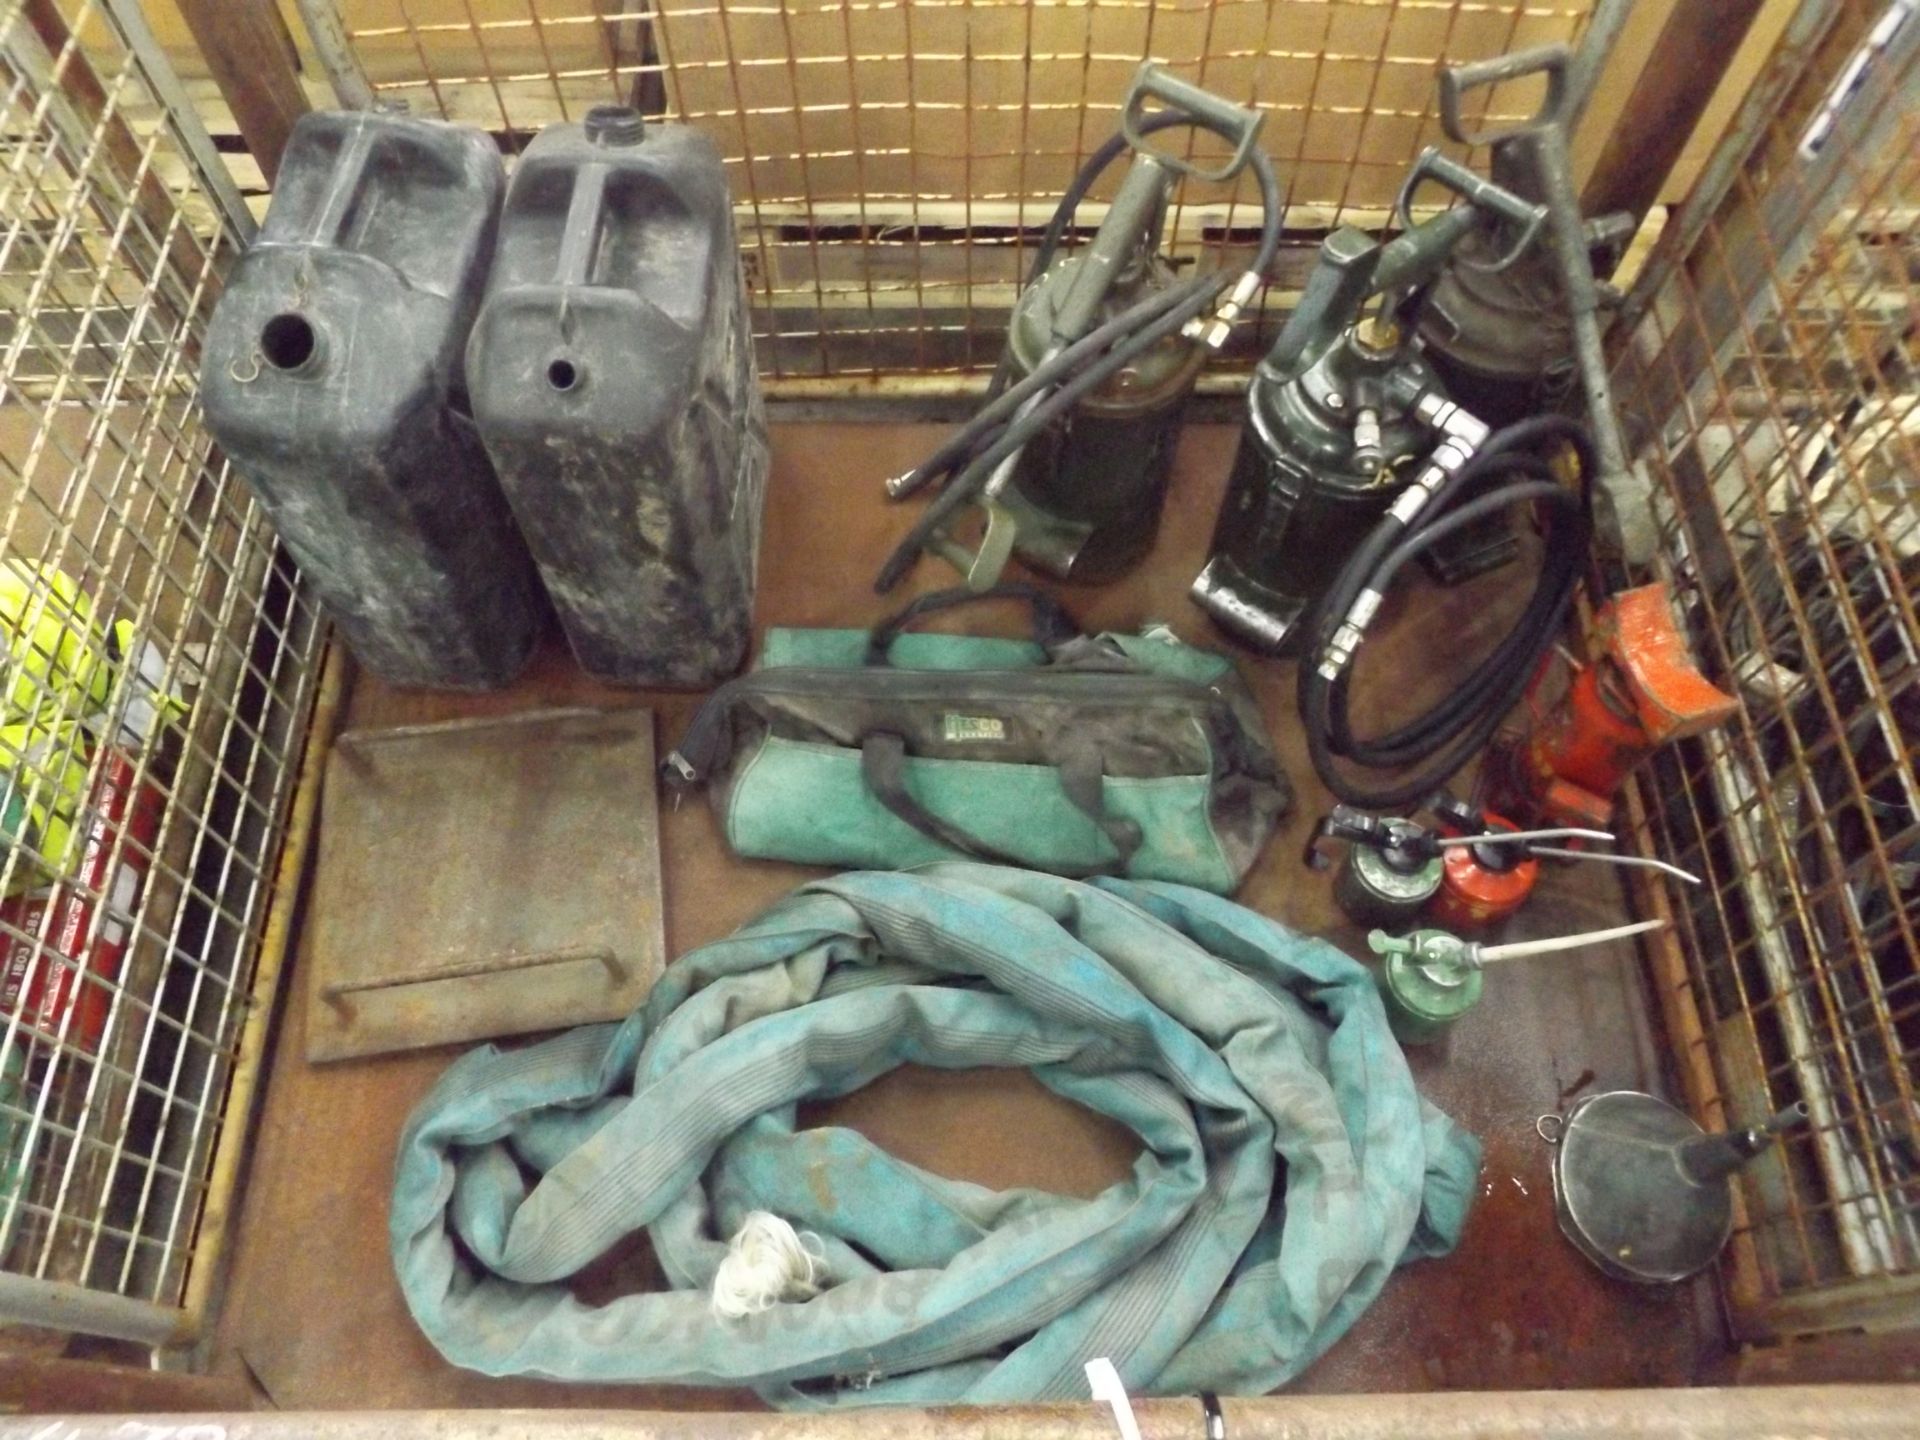 Mixed Stillage of Vehicle Tools and Equipment